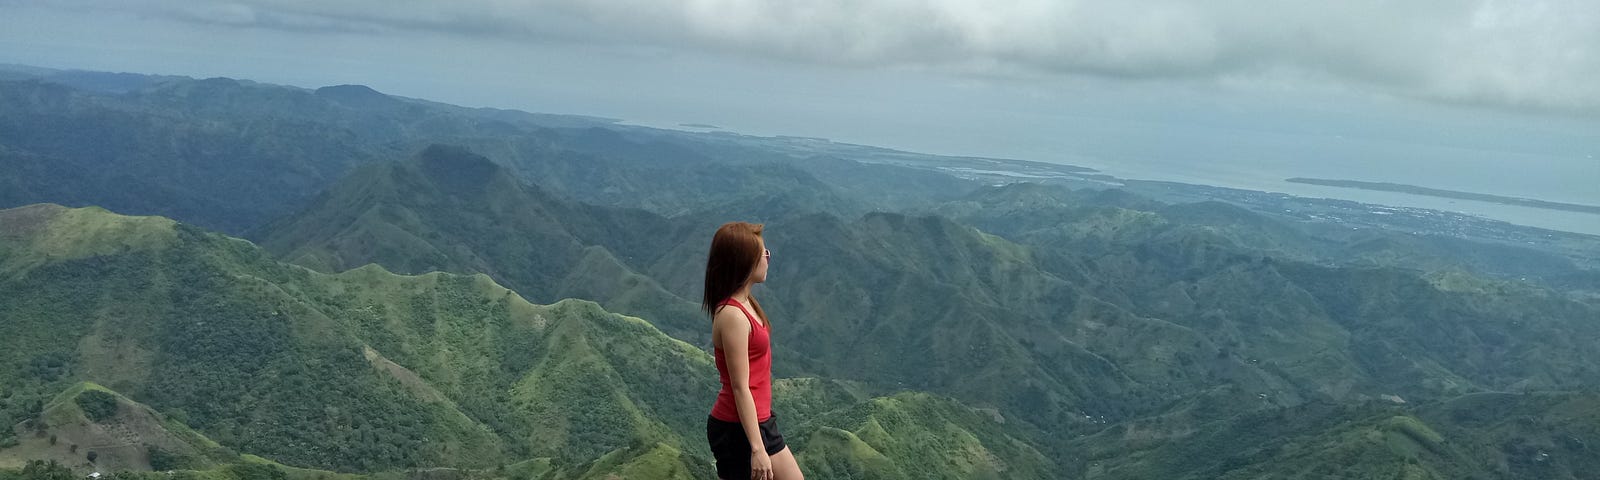 A woman standing on a peak of a mountain